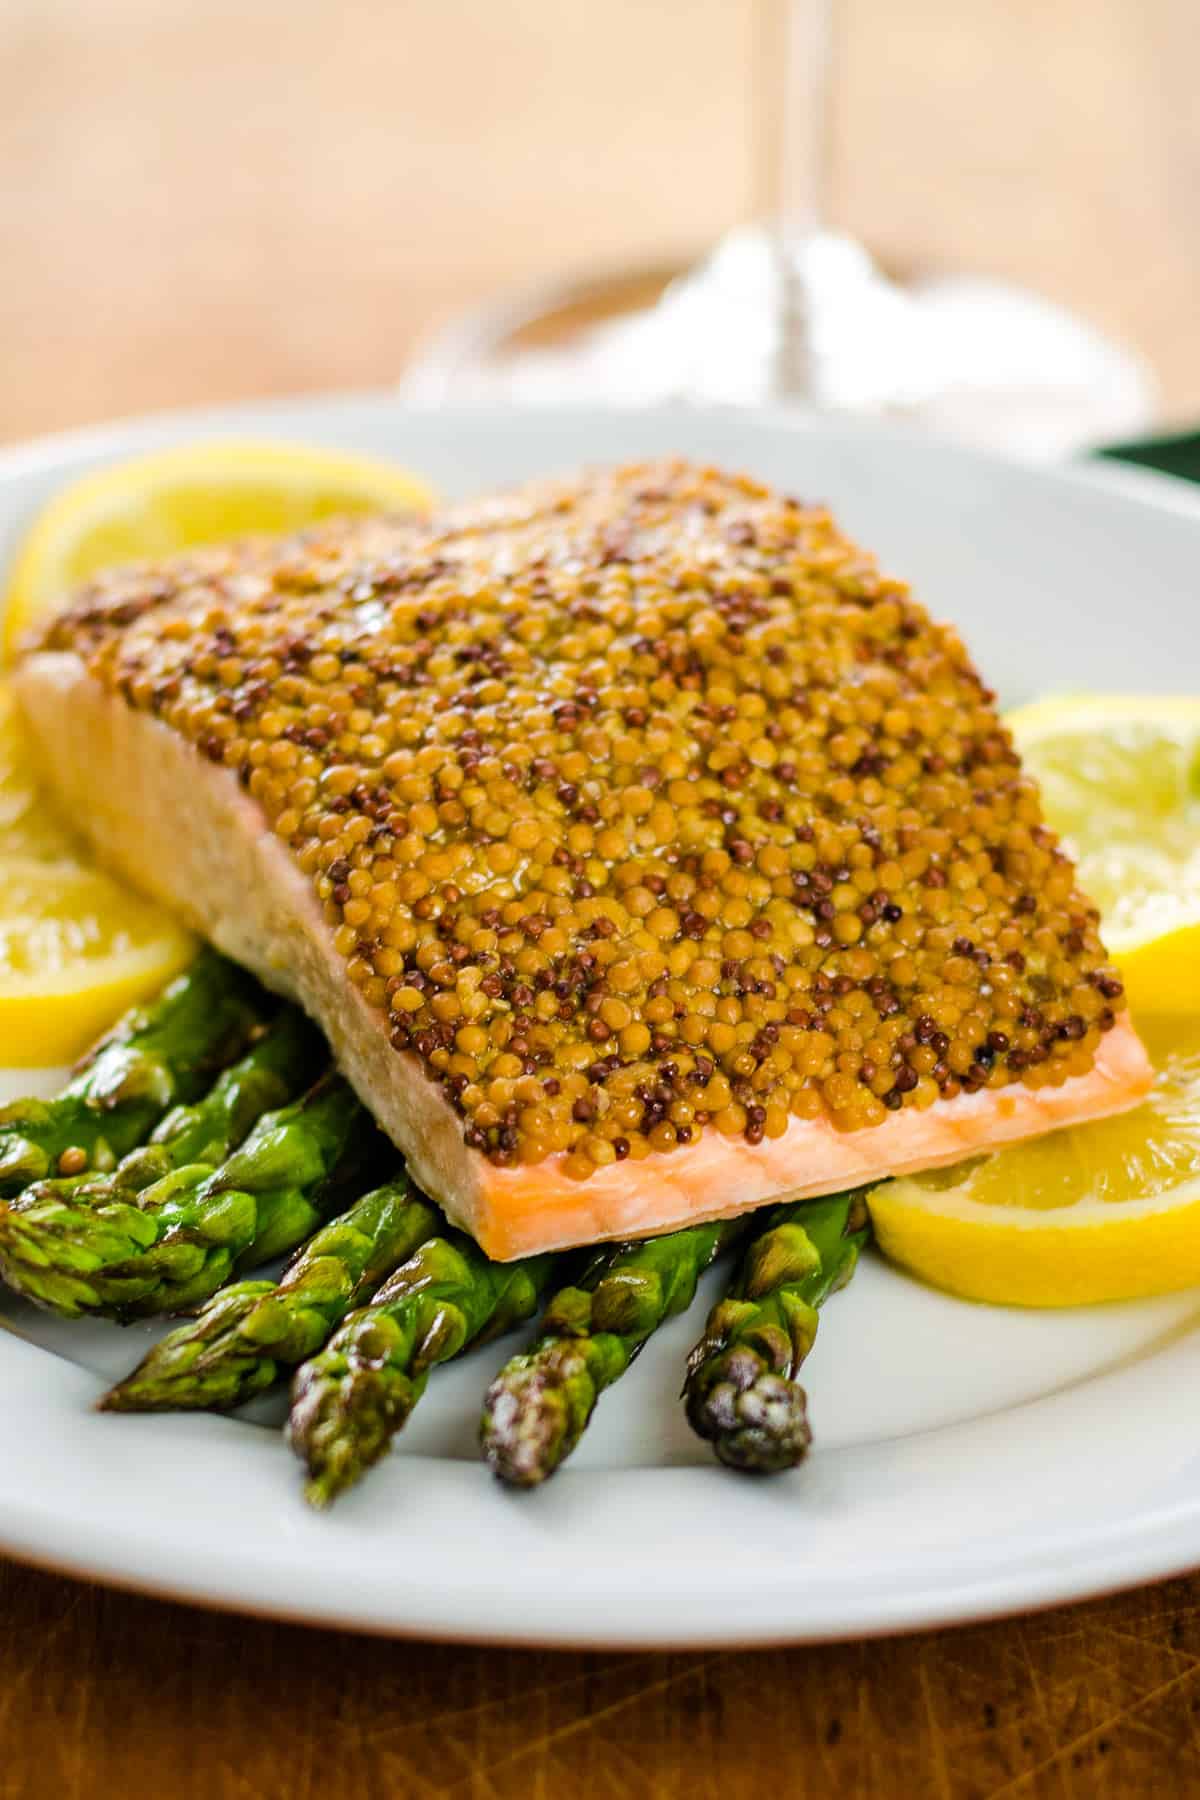 Mustard Baked Salmon and Asparagus from Cook Eat Well